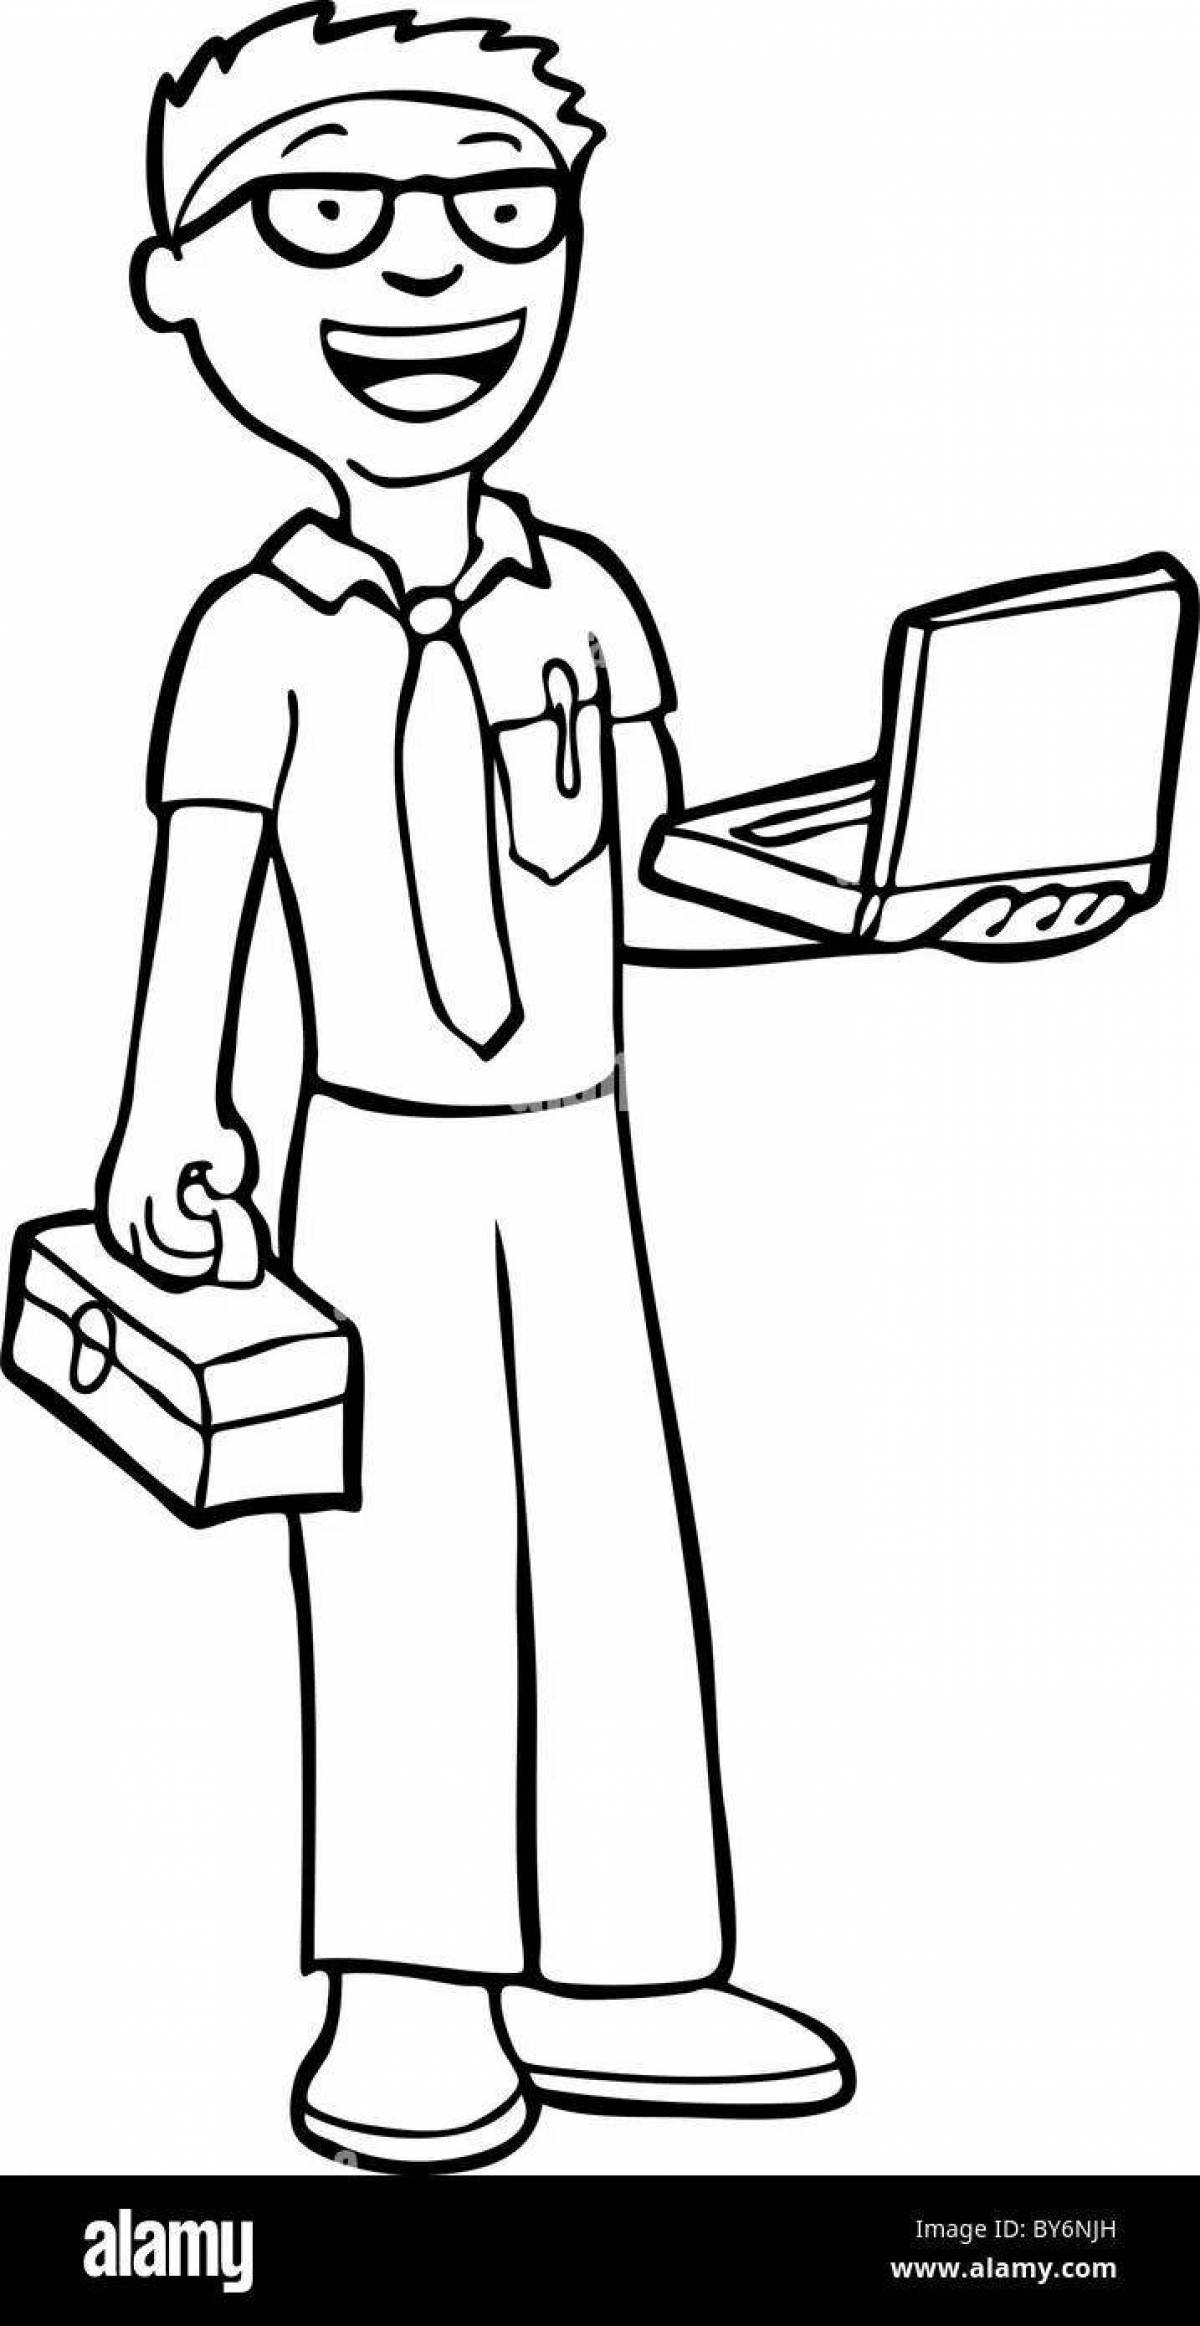 Programmer coloring page